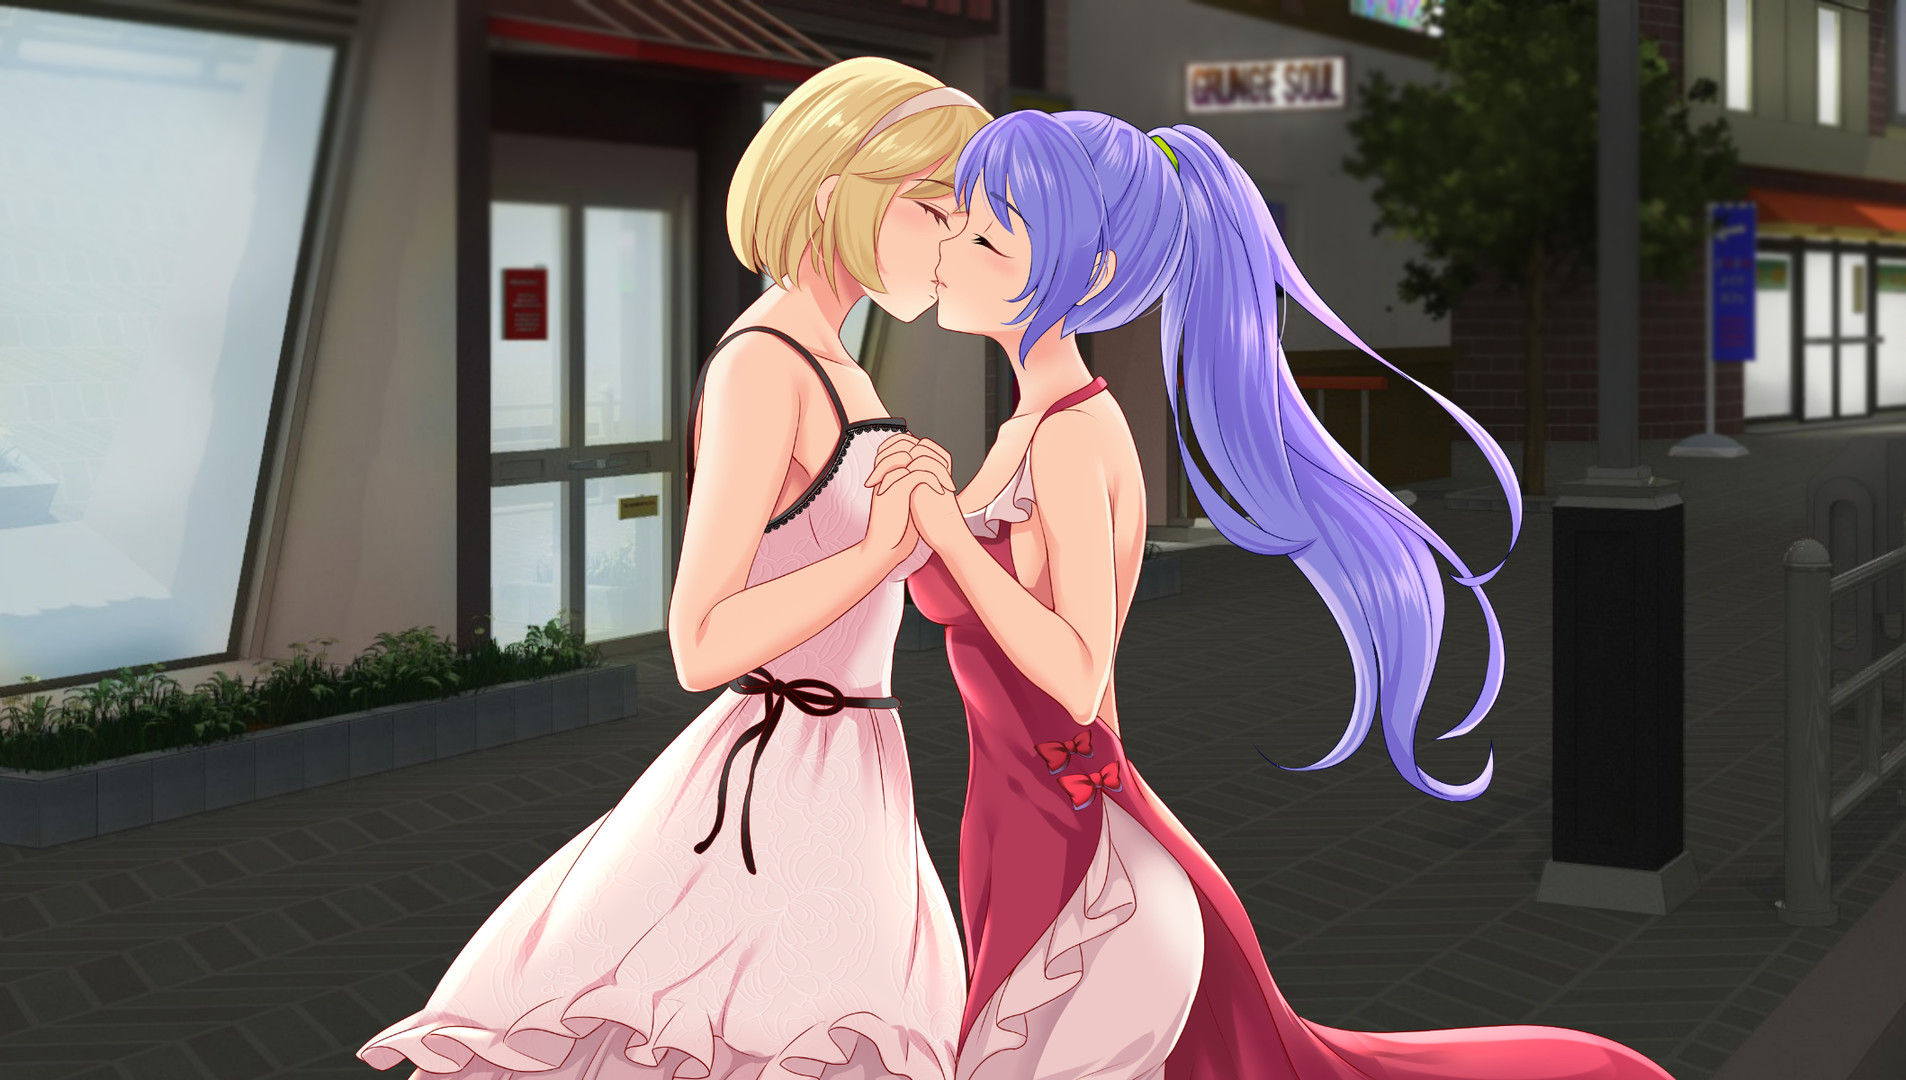 Sweet Volley High - A Yuri / Otome Visual Novel from NewWestGames Sweet Vol...